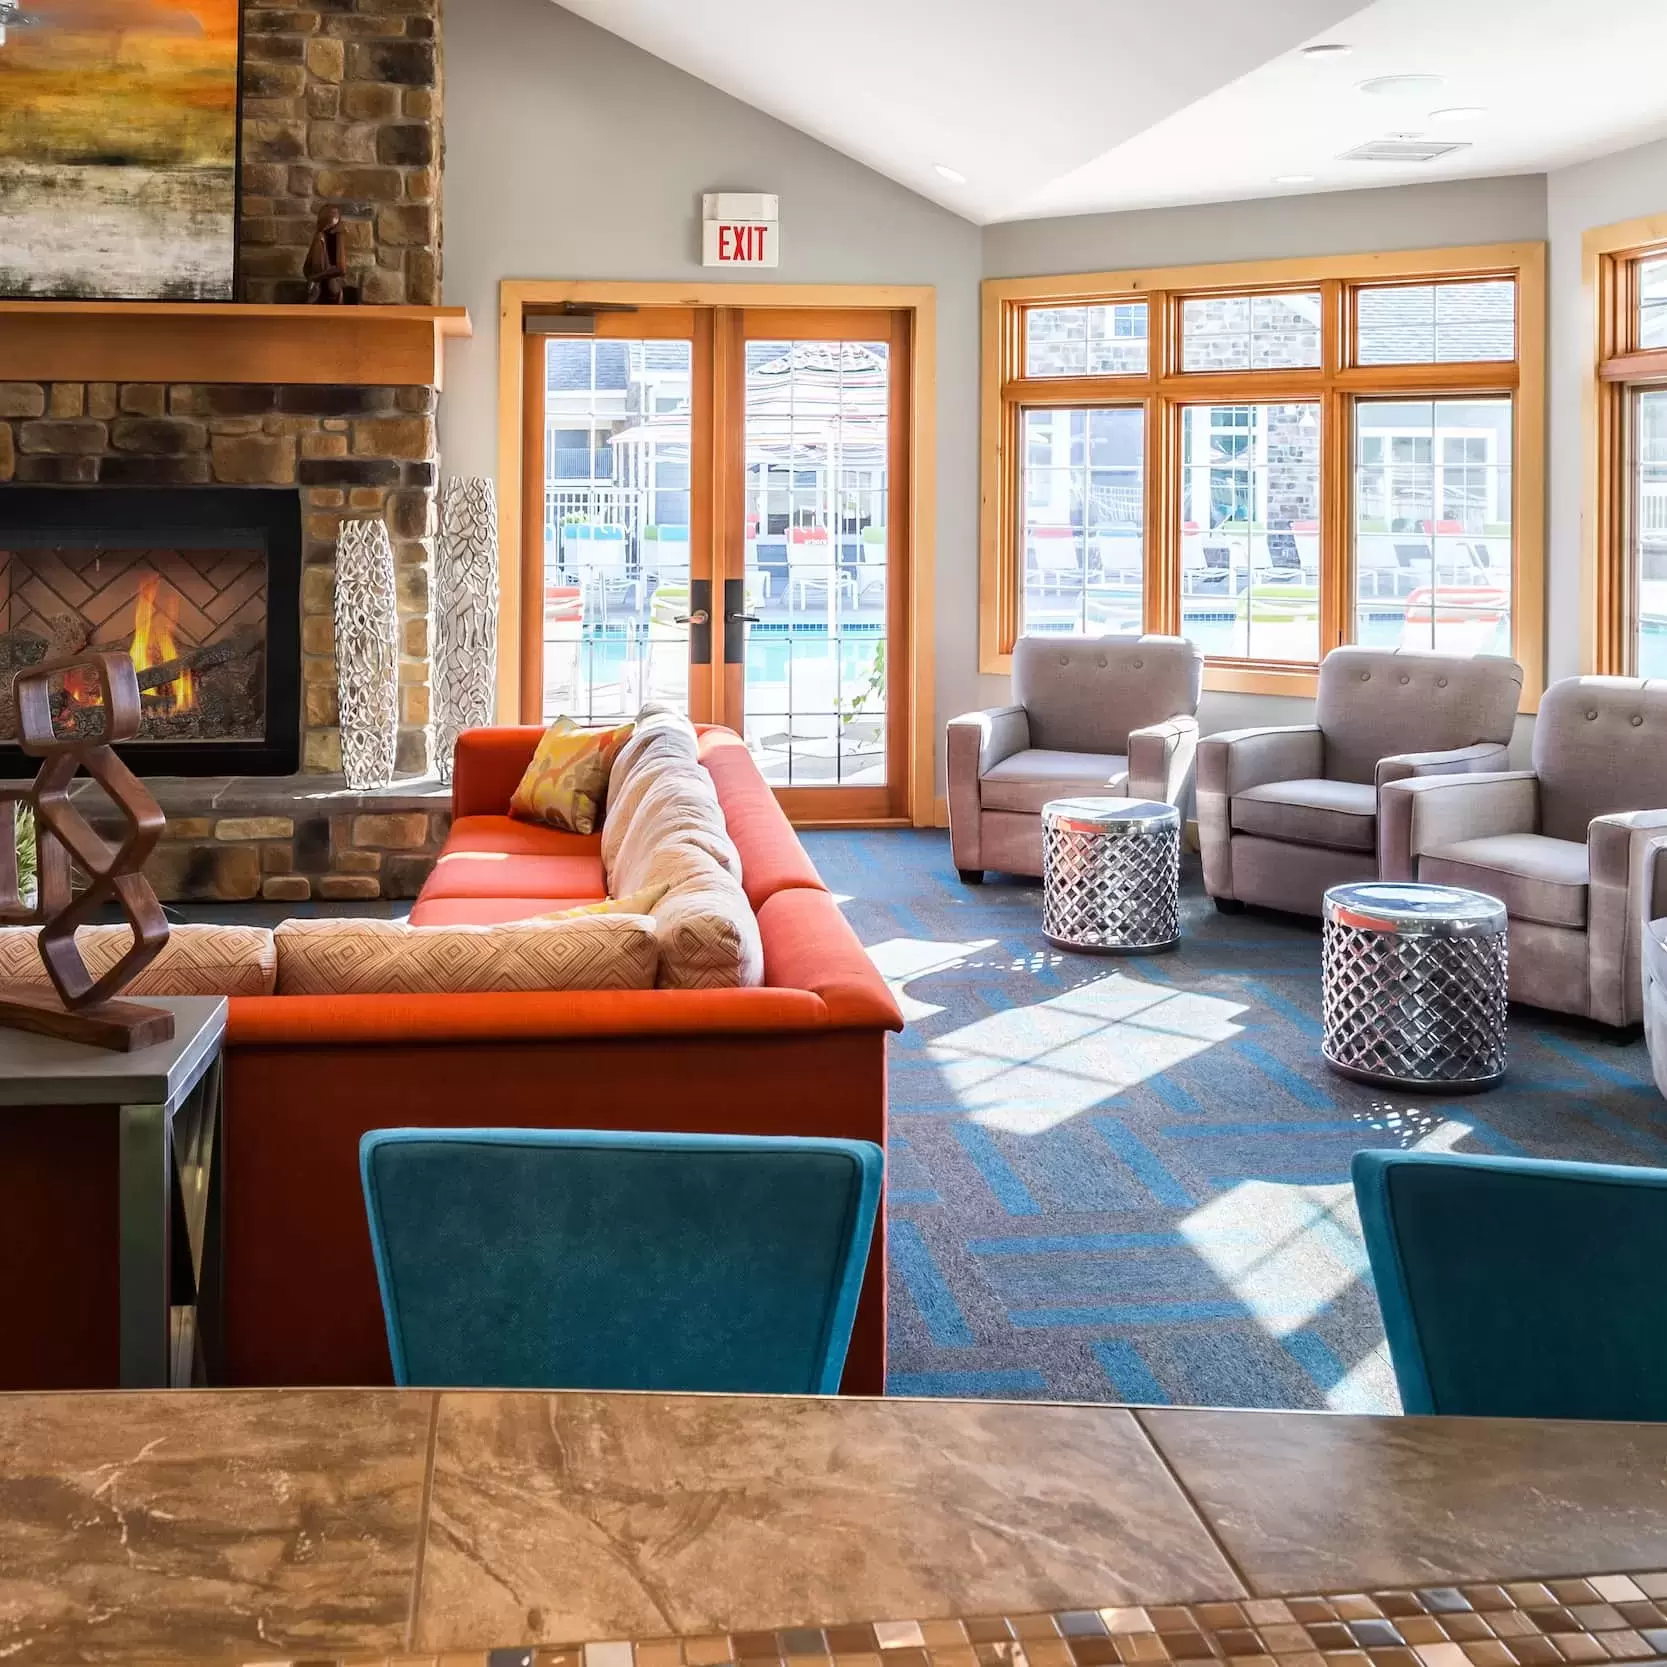 In the Resident Hub a big comfy couch and chairs sit in front of a large stone fireplace.